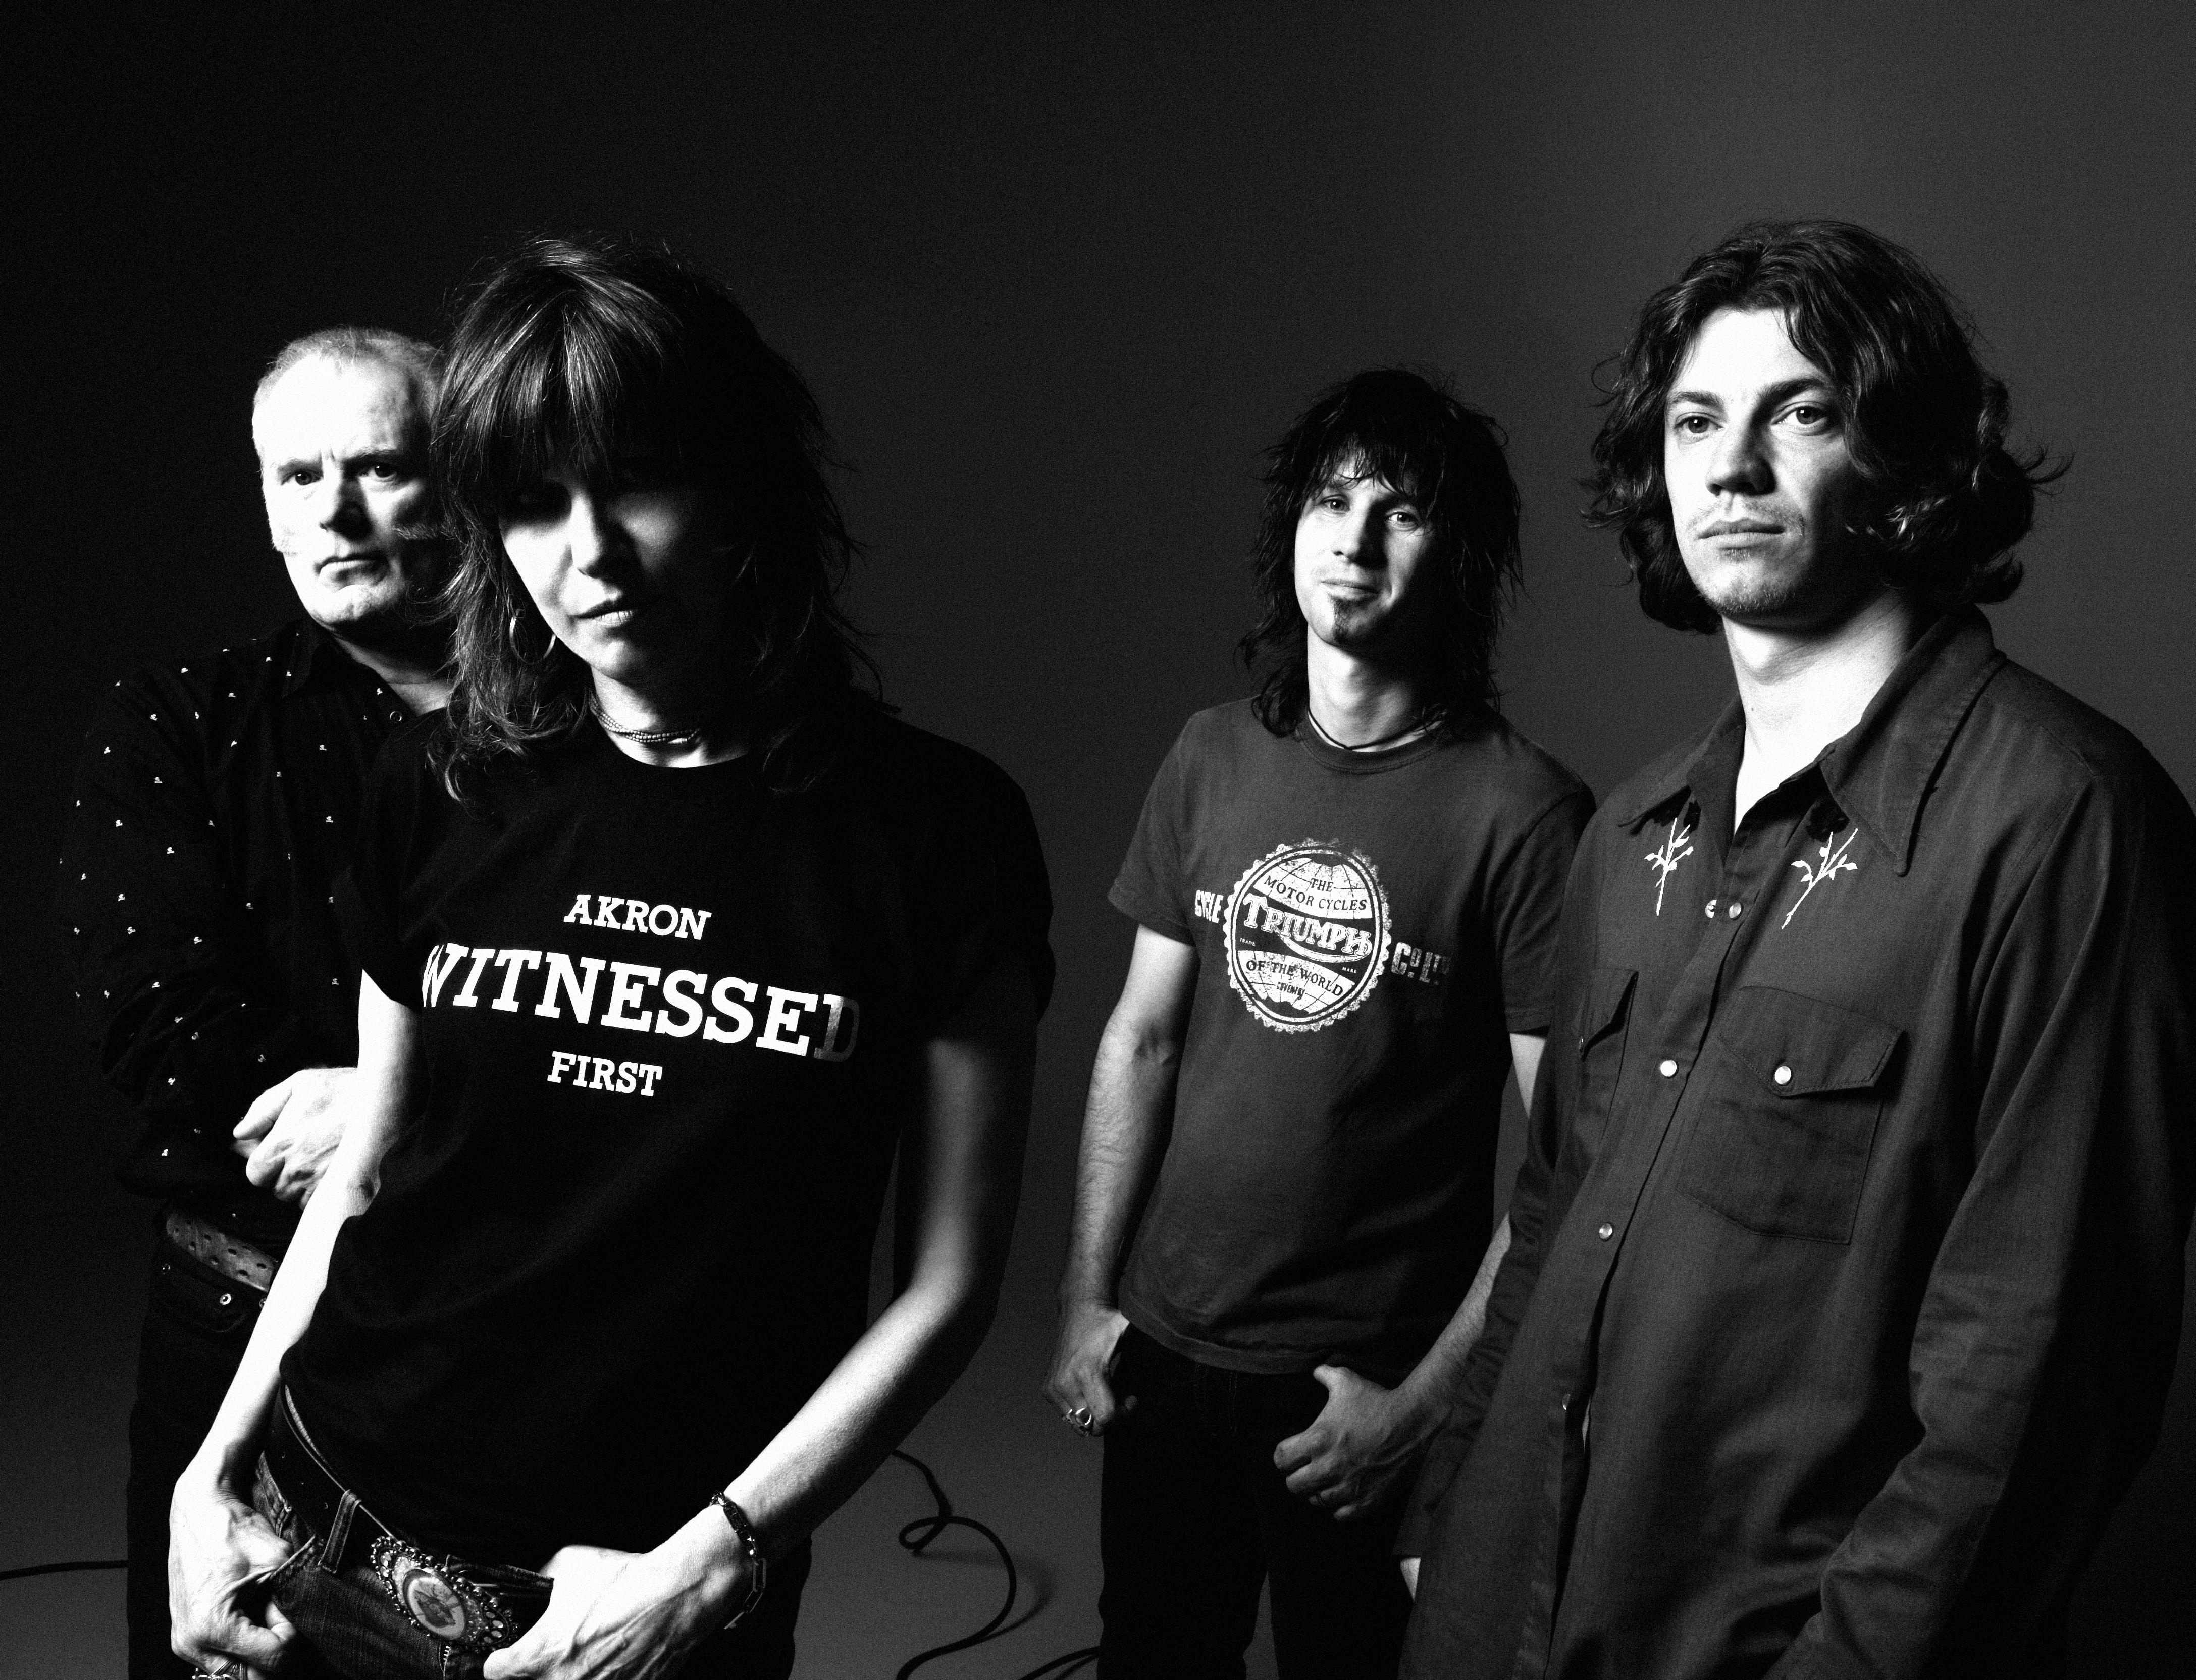 Chrissie Hynde, second left, with the rest of her Pretenders bandmates, Martin Chambers, Nick Wilkinson and James Walbourne. Photo: Lushington Entertainments